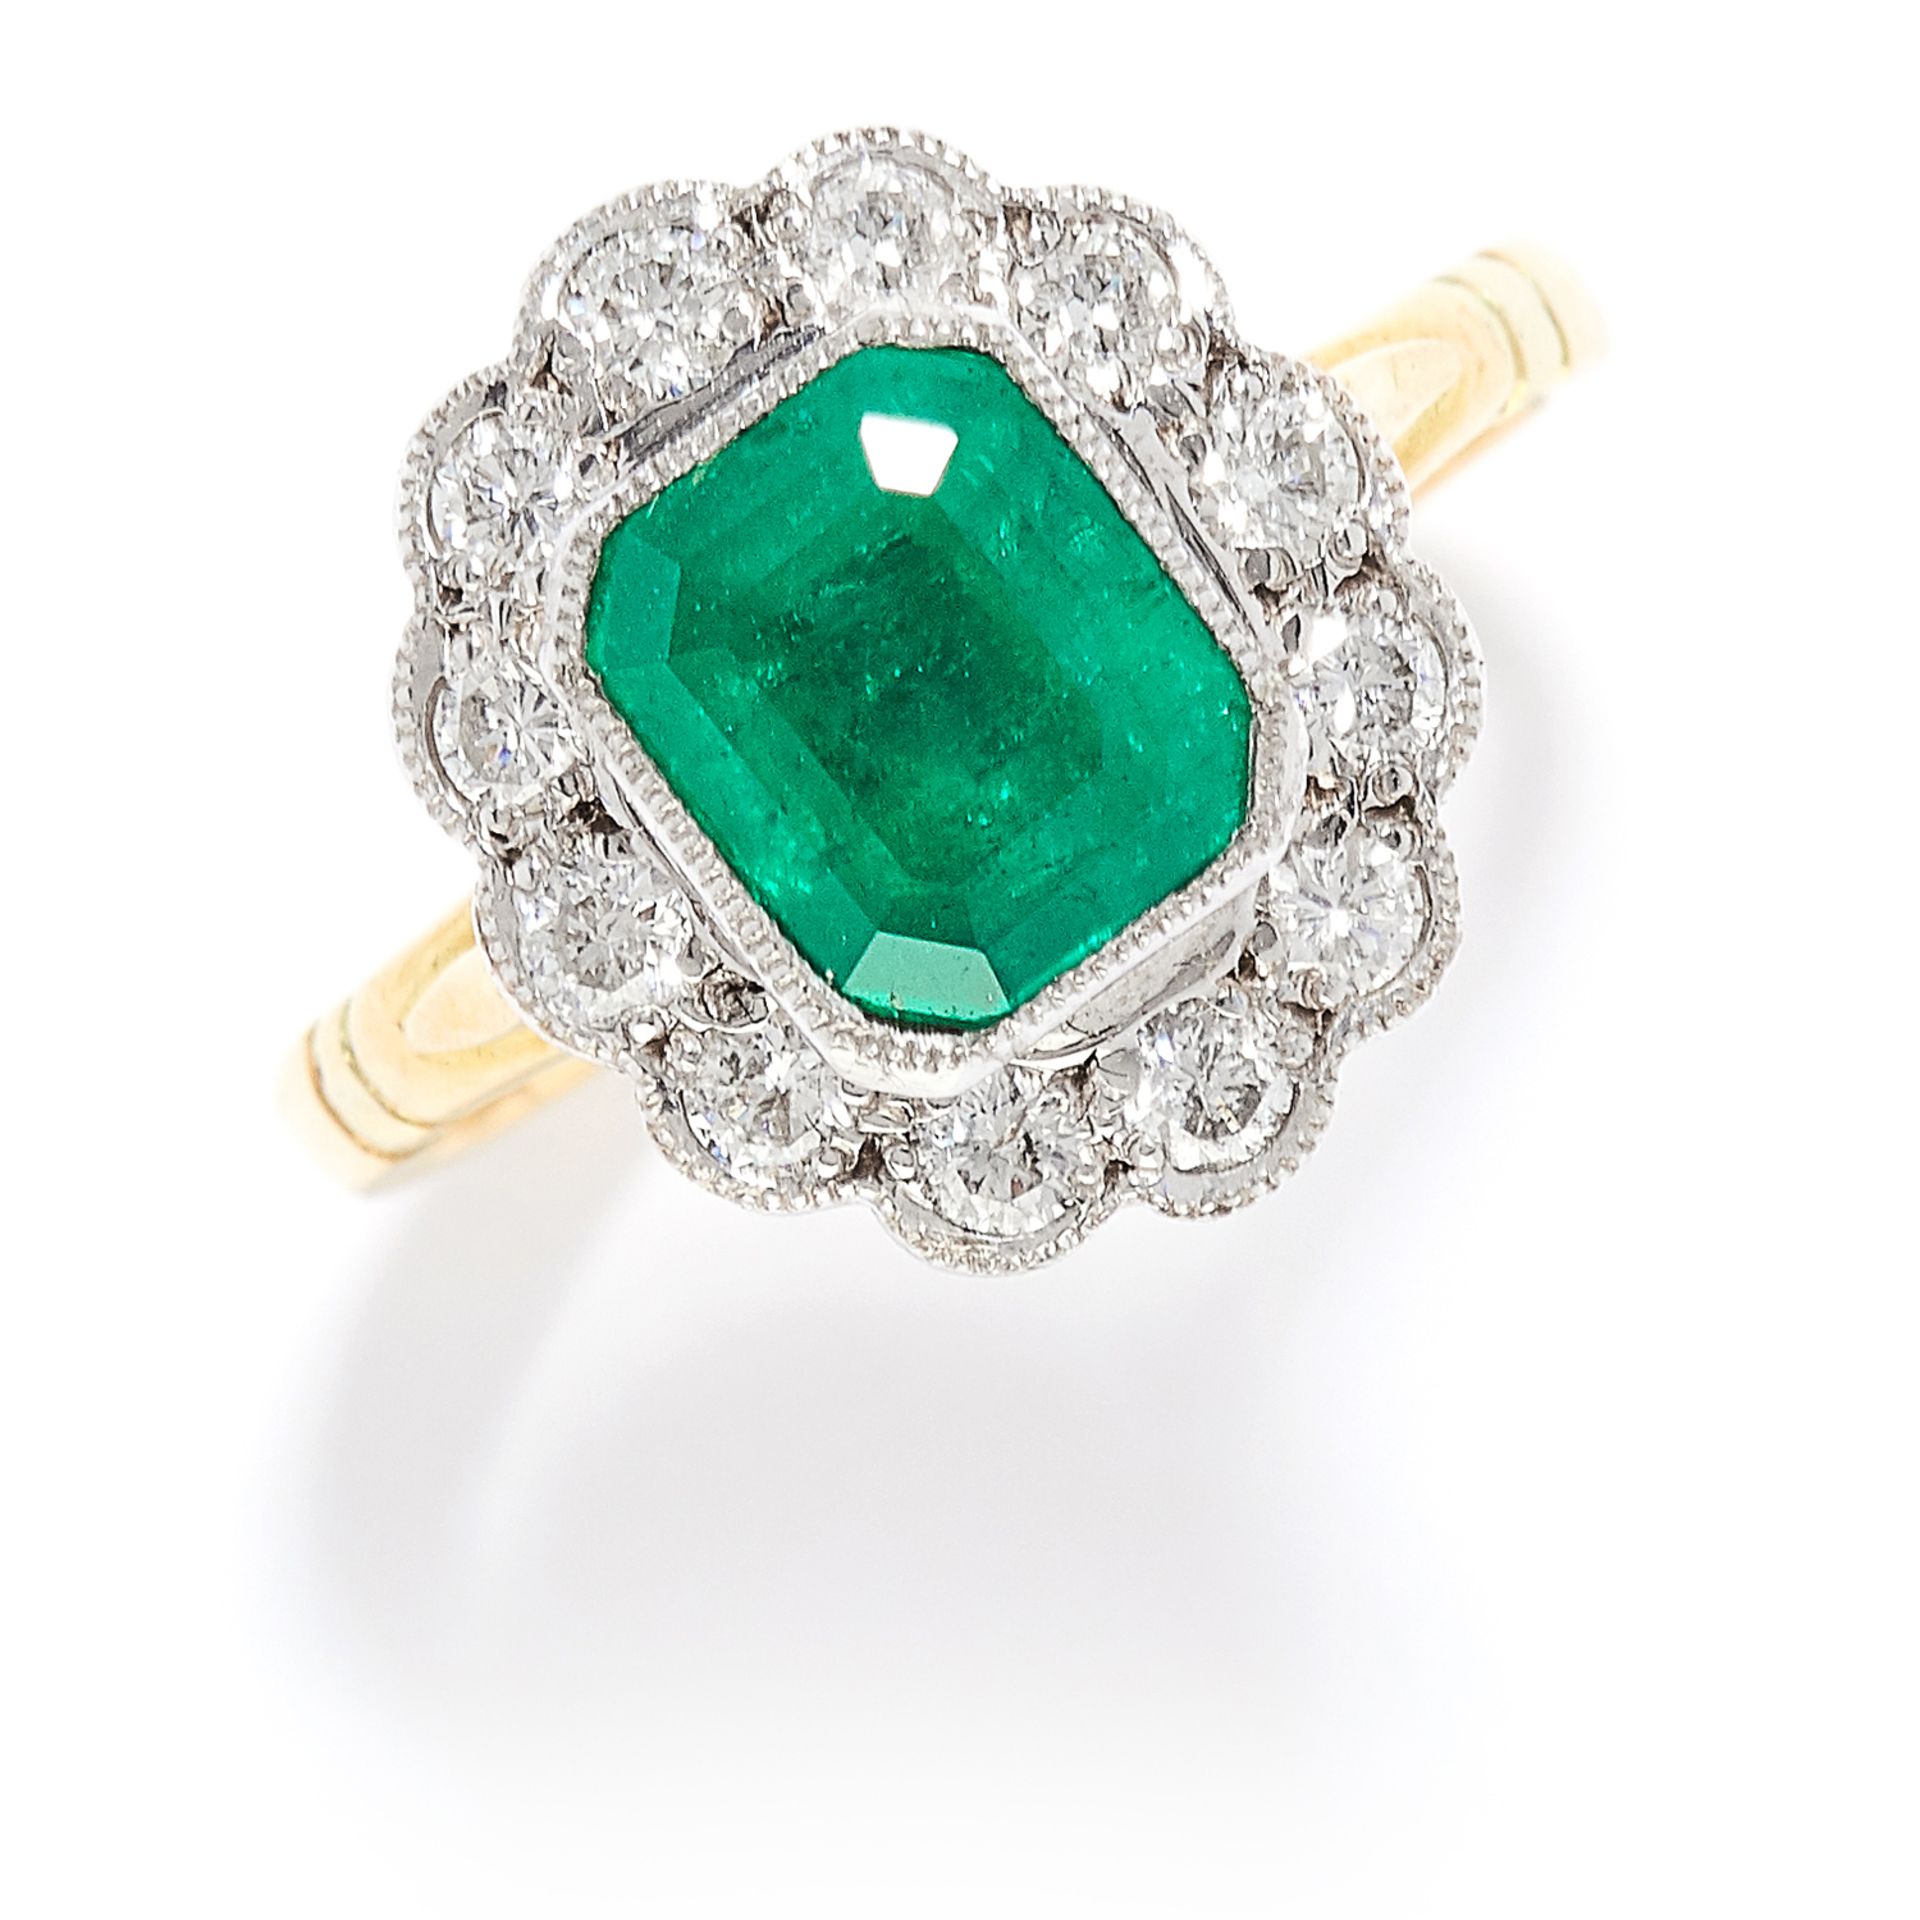 1.56 CARAT EMERALD AND DIAMOND CLUSTER RING in 18ct yellow gold, set with an emerald cut emerald